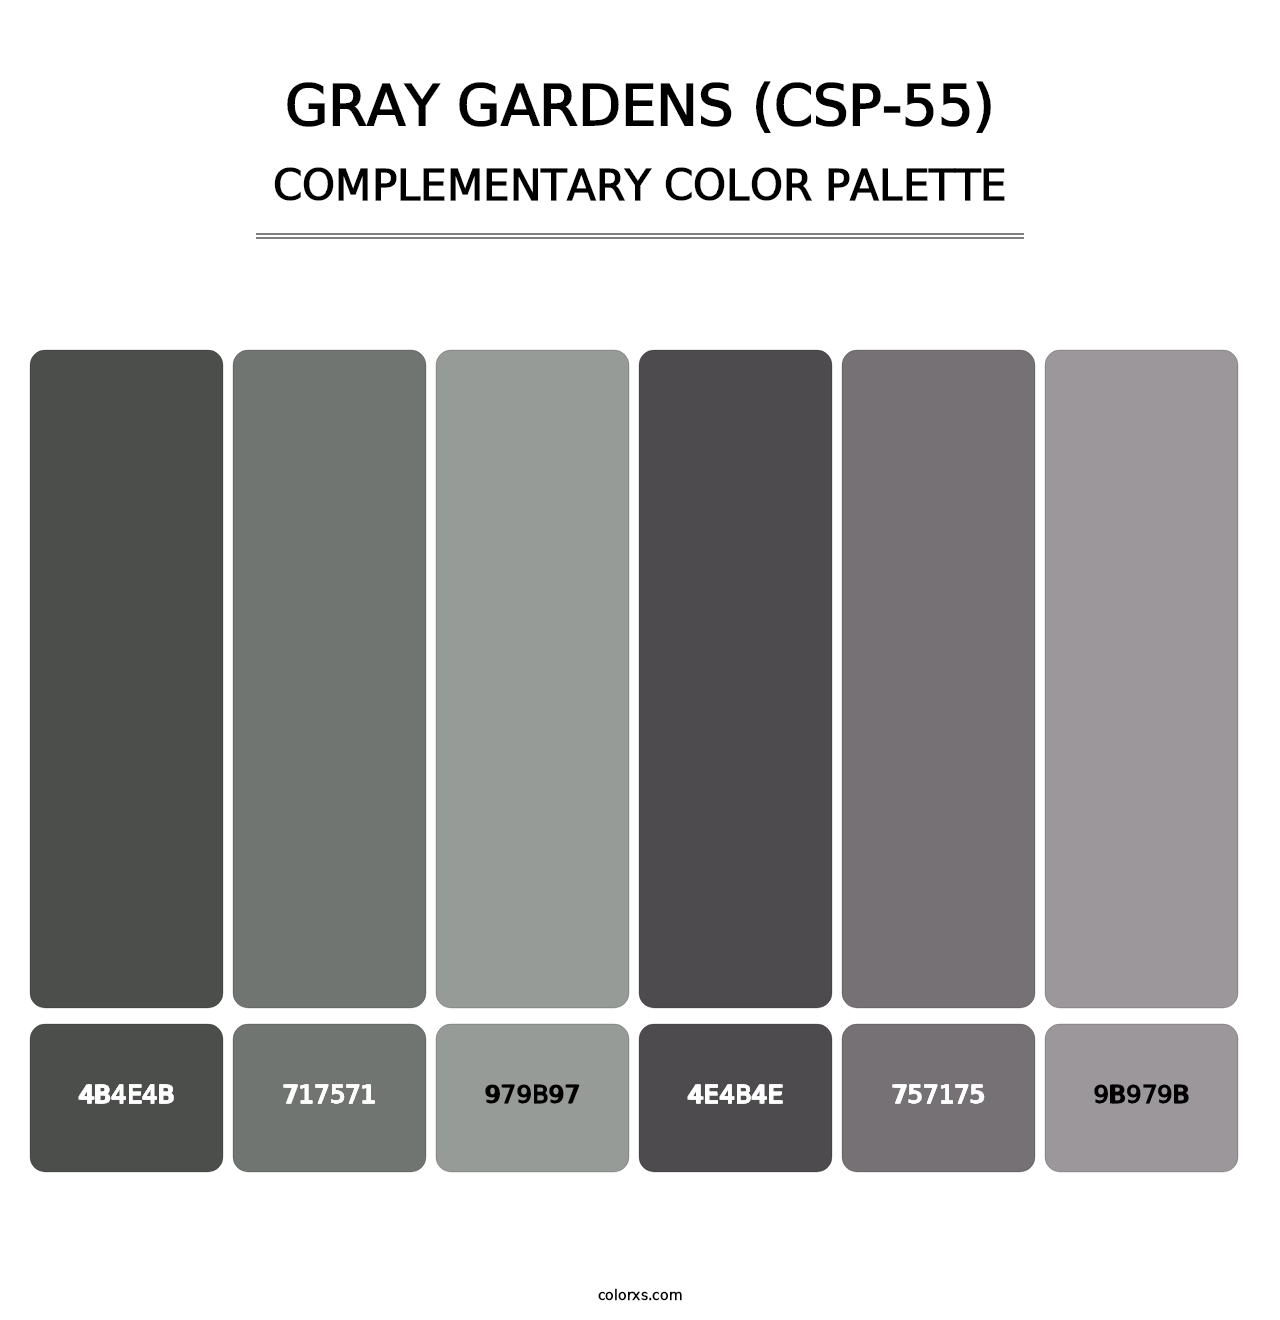 Gray Gardens (CSP-55) - Complementary Color Palette